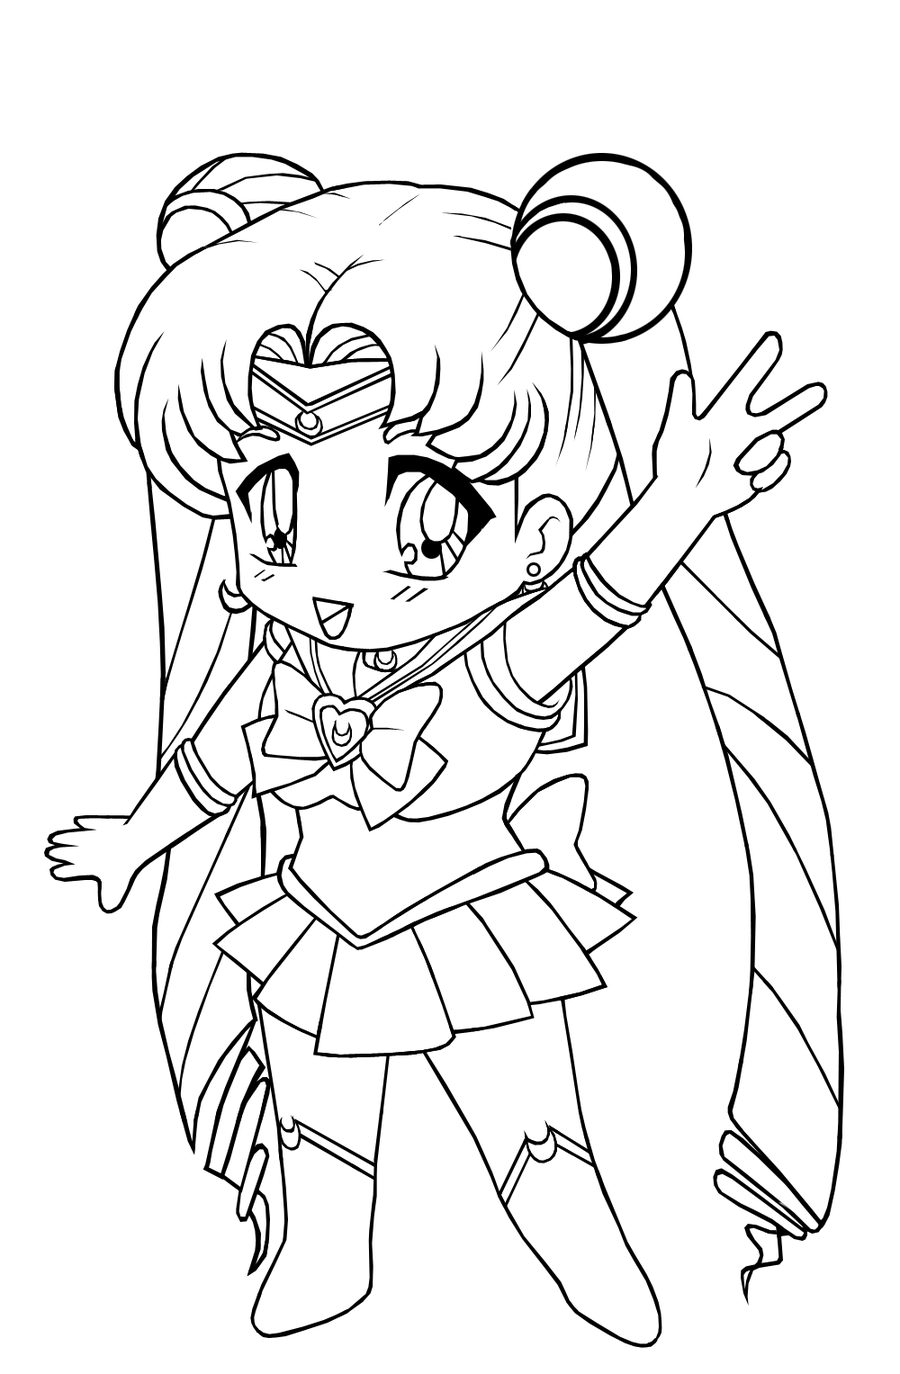 Chibi Sailor Cosmos Coloring Pages - Coloring Pages For All Ages